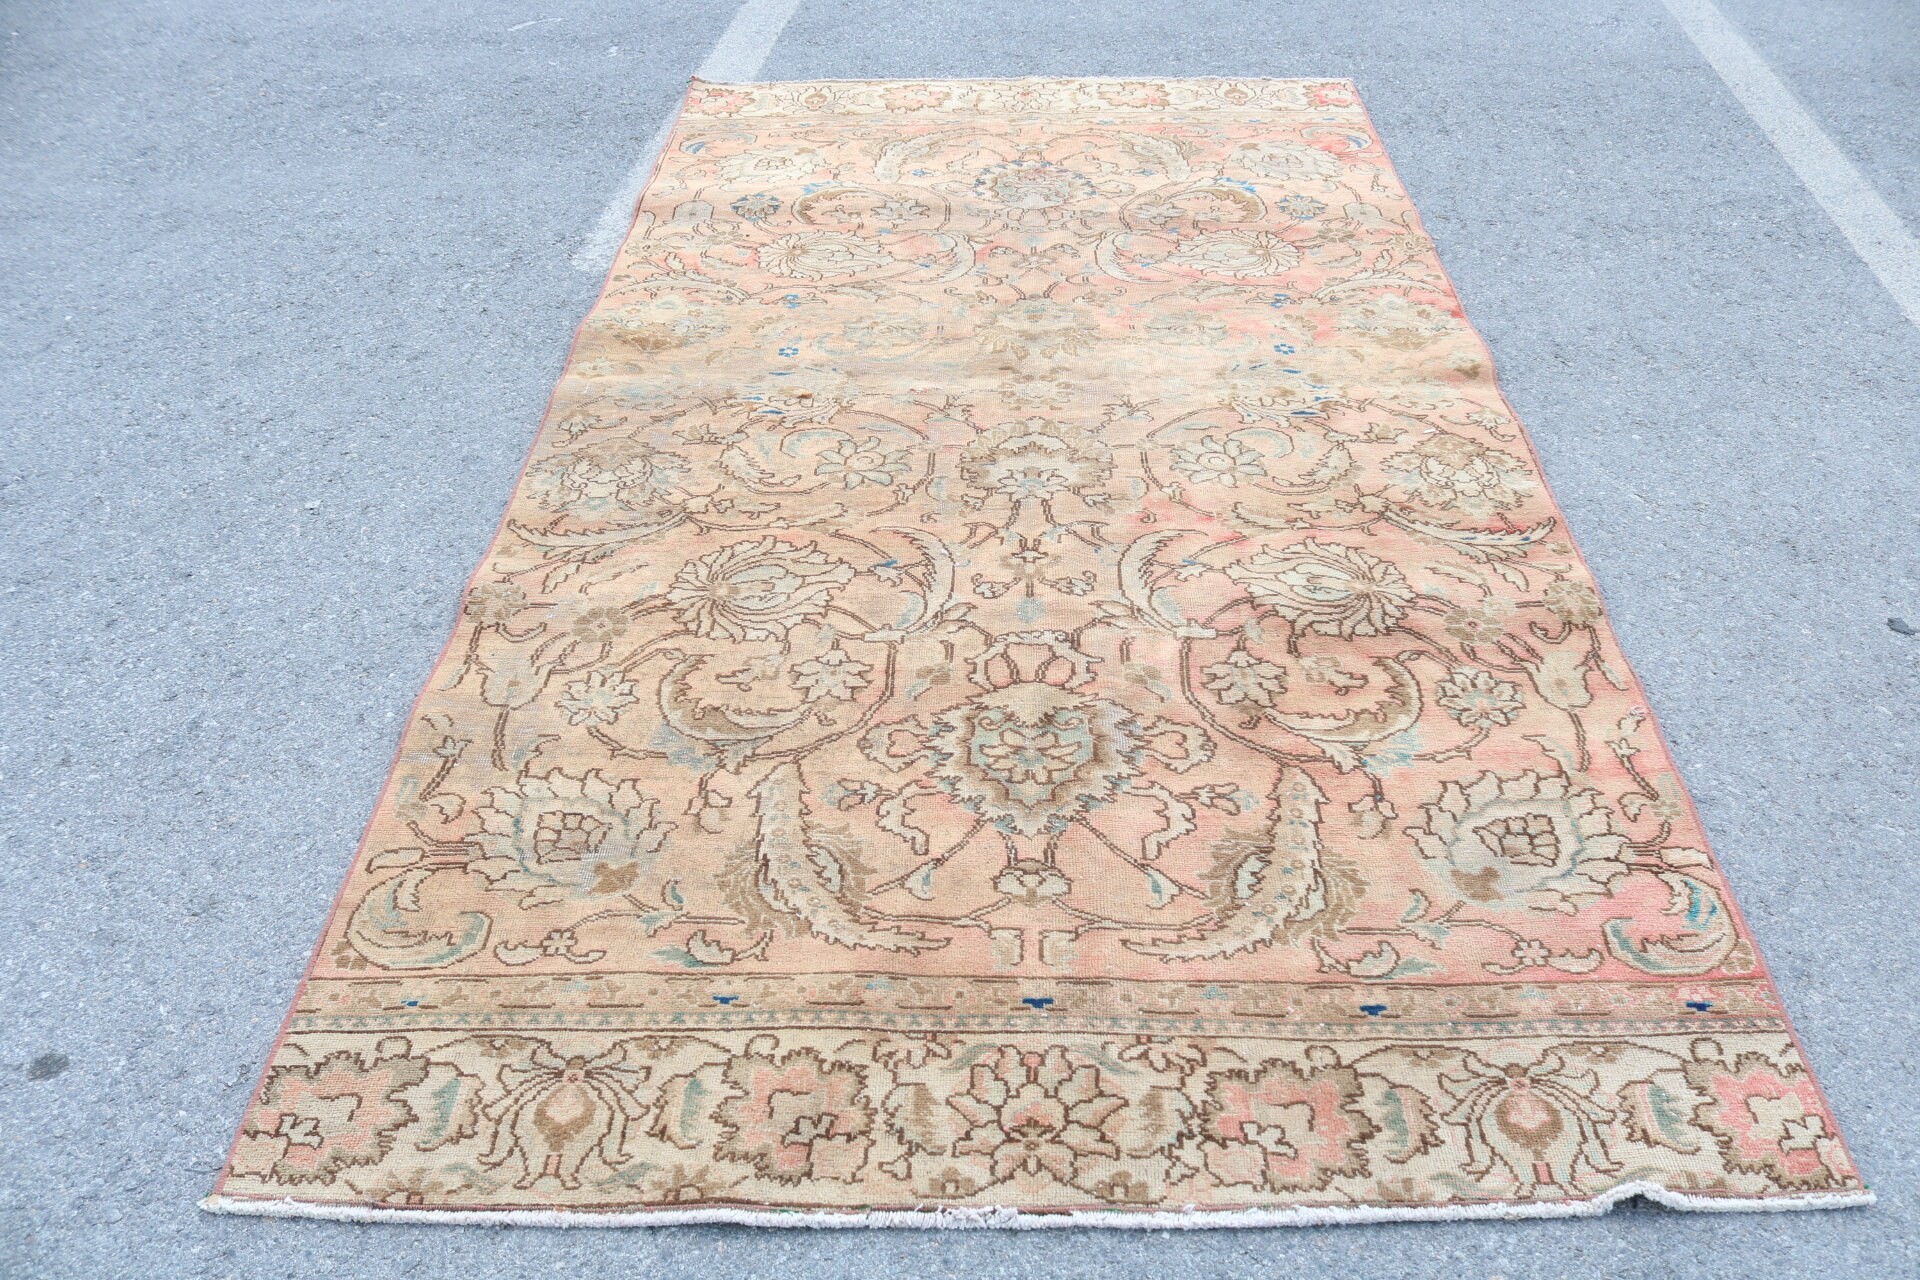 Wool Rug, Moroccan Rugs, Bedroom Rug, Large Vintage Rug Rugs, Salon Rug, Vintage Rug, Turkish Rug, Rugs for Salon, 5.1x9.7 ft Large Rugs